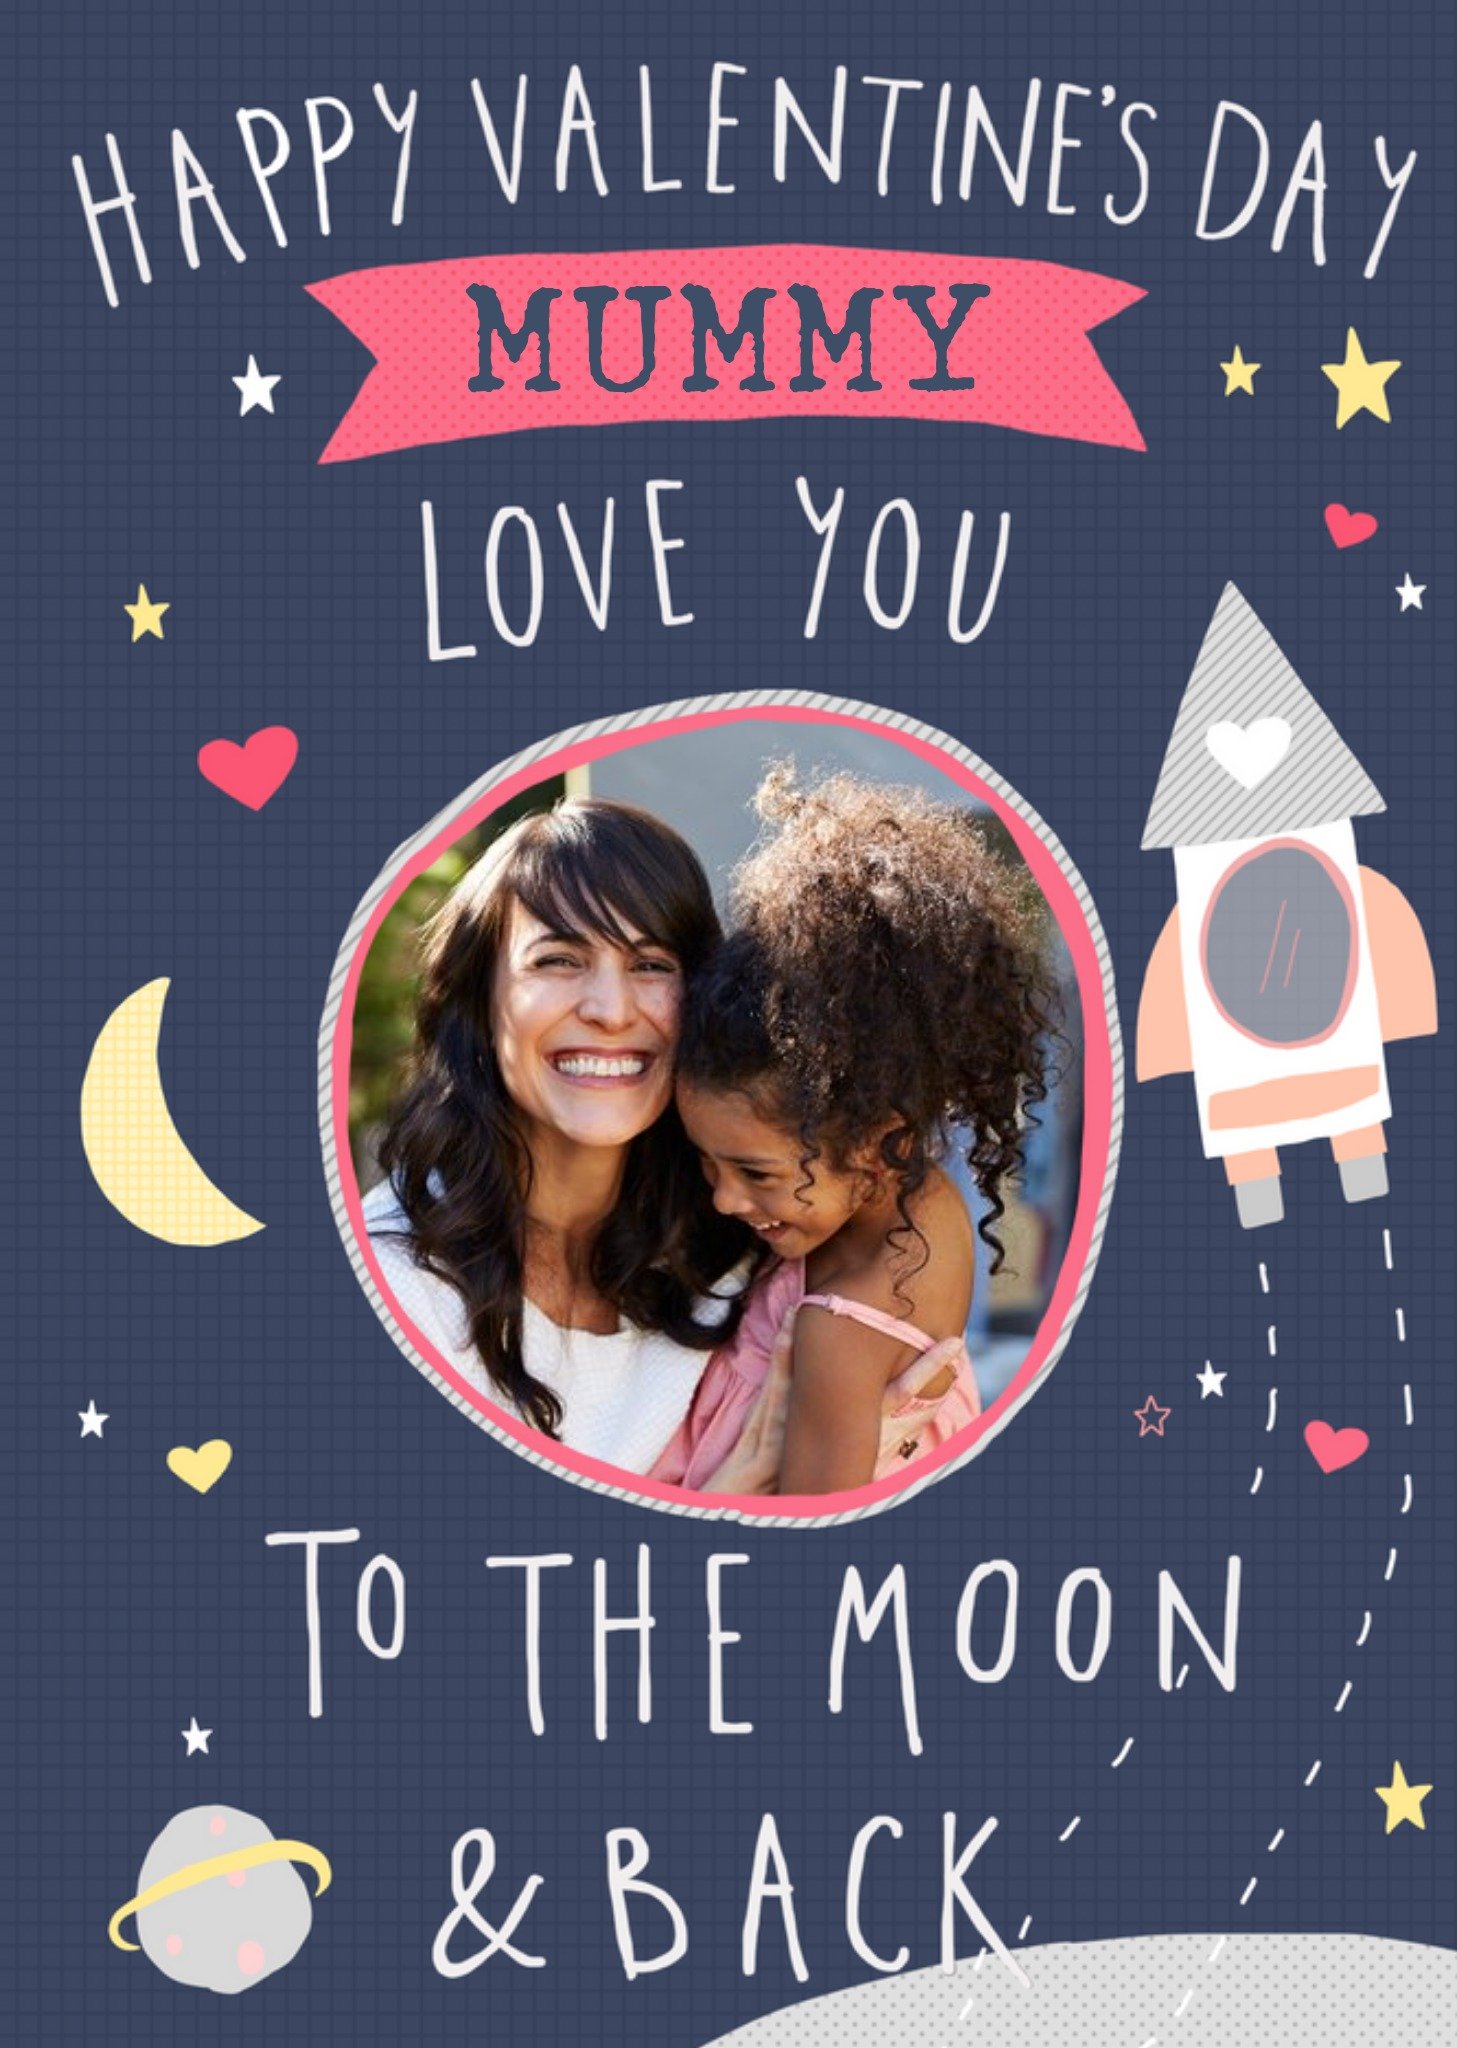 Moonpig Mummy Love You To The Moon & Back Cute Valentines Day Photo Upload Card Ecard